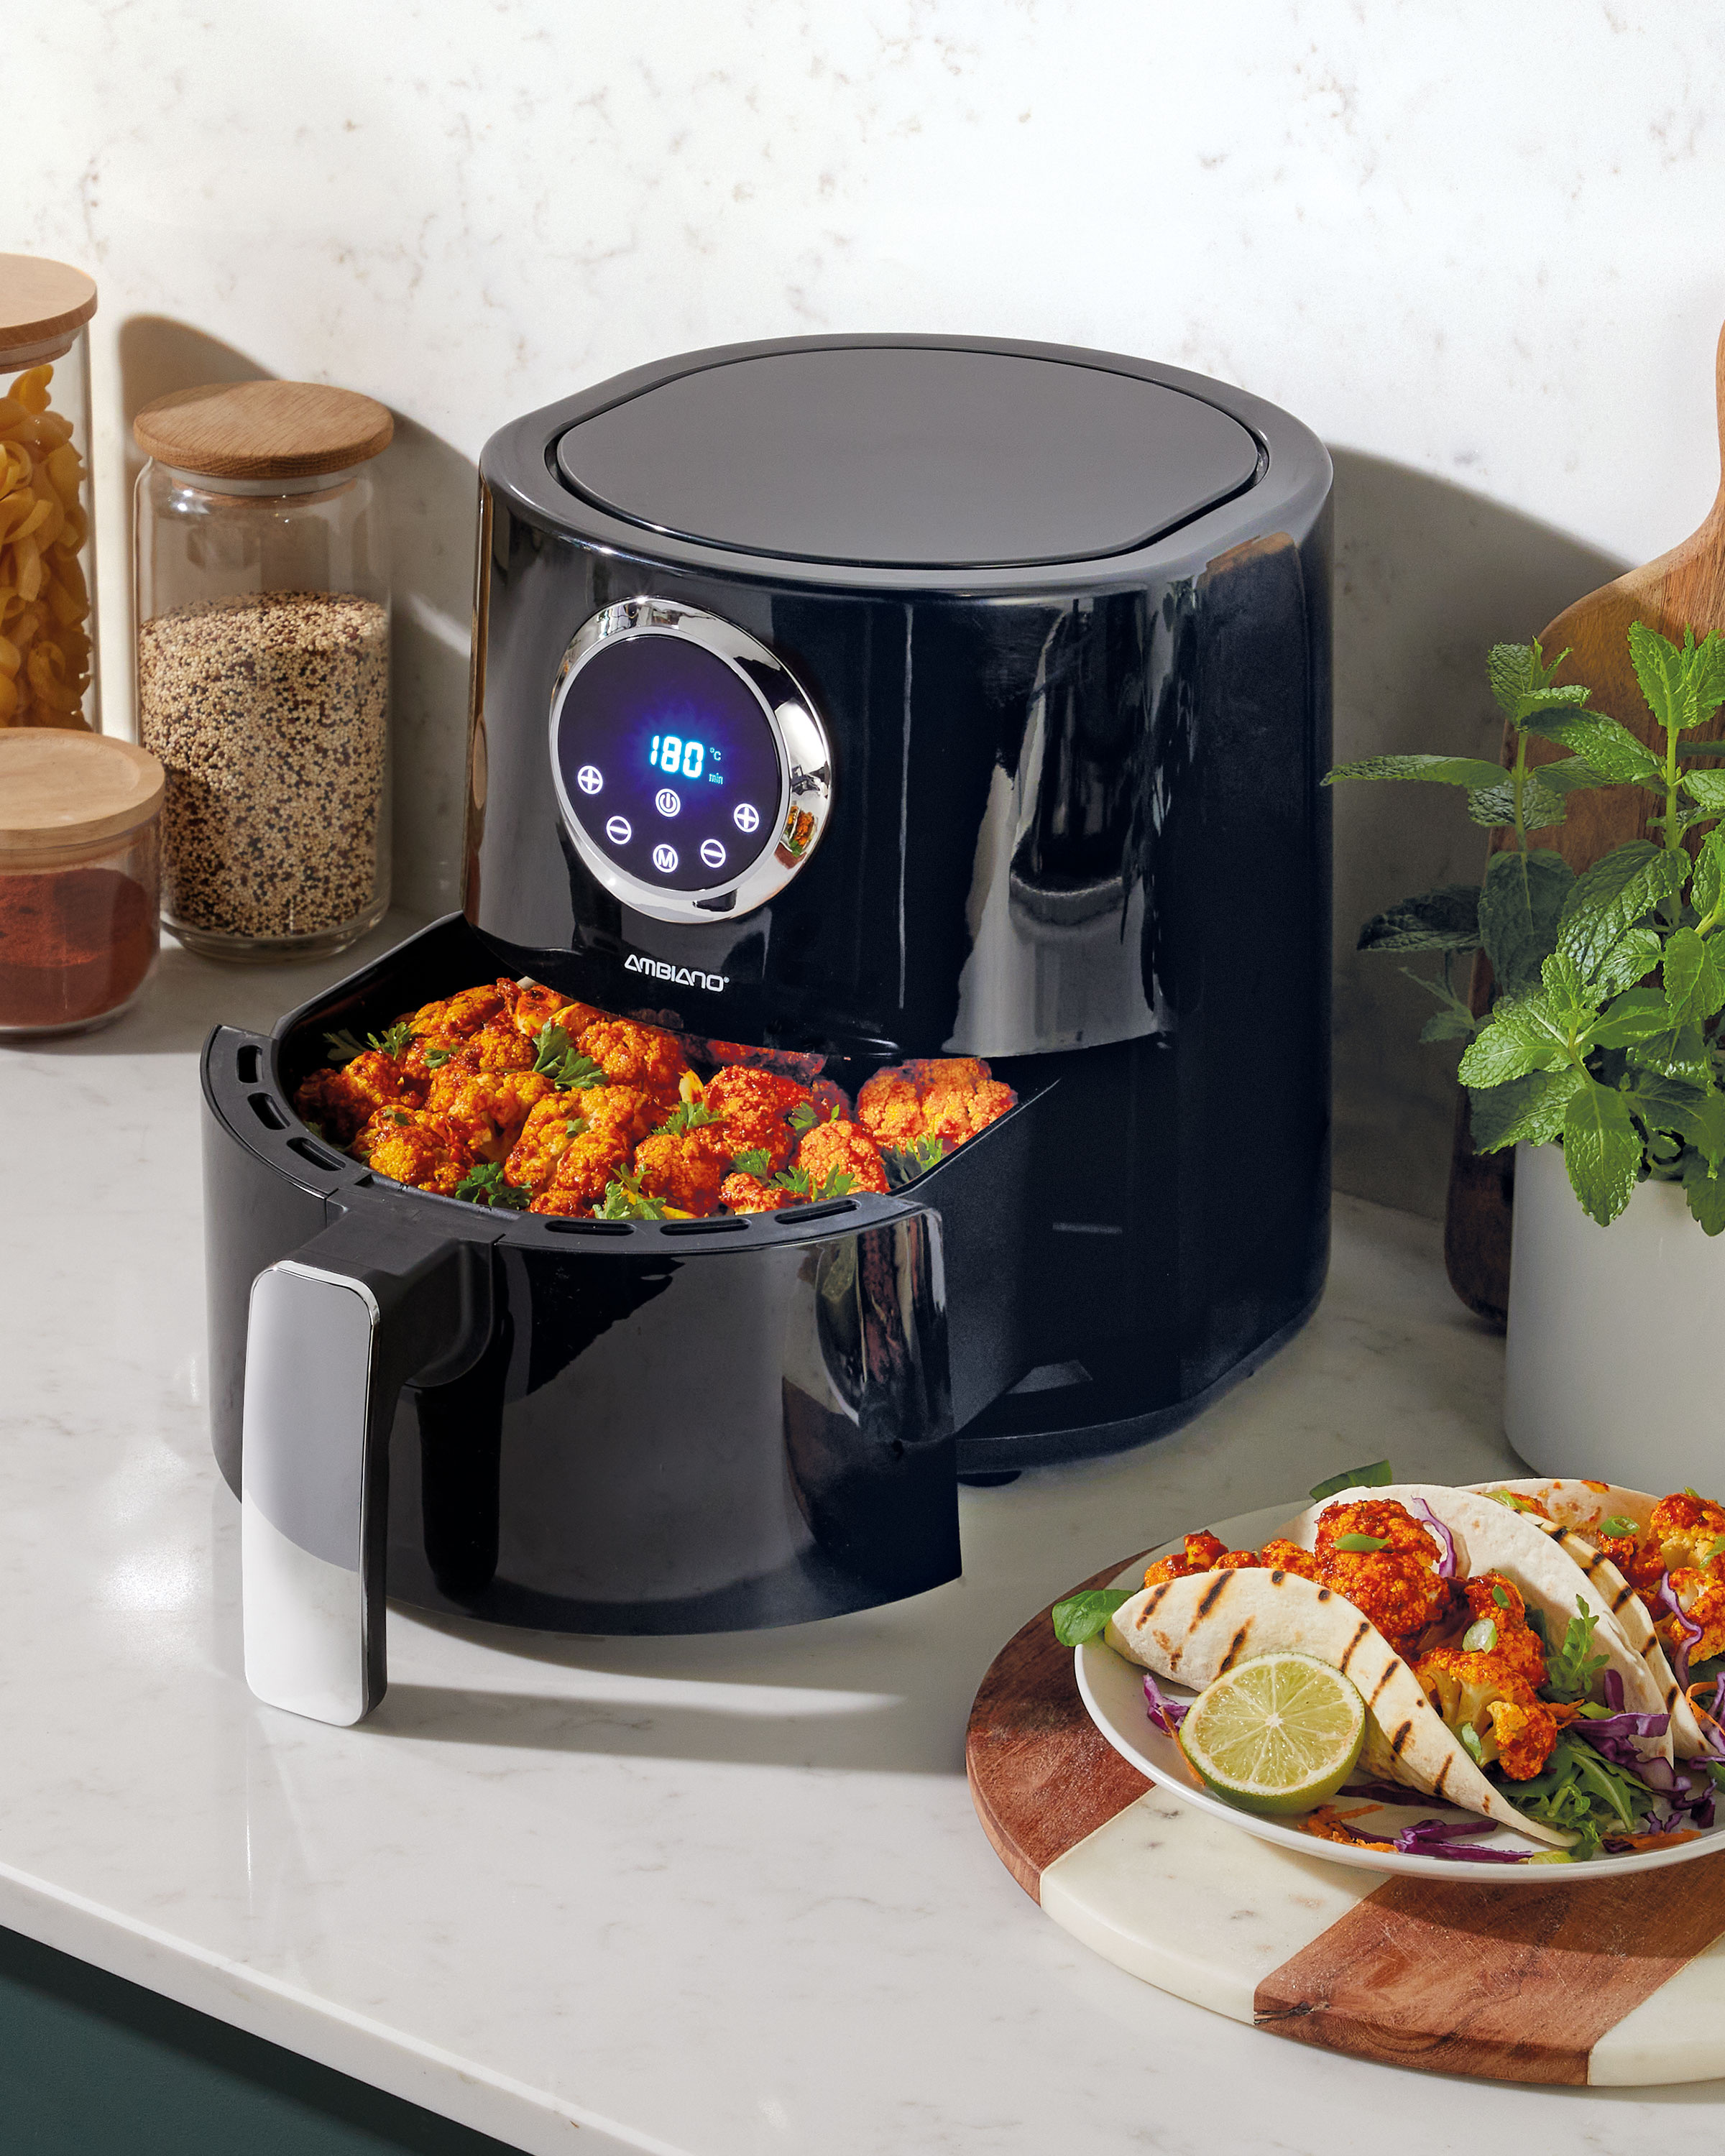 Aldi air fryer: How to buy the appliance for £35